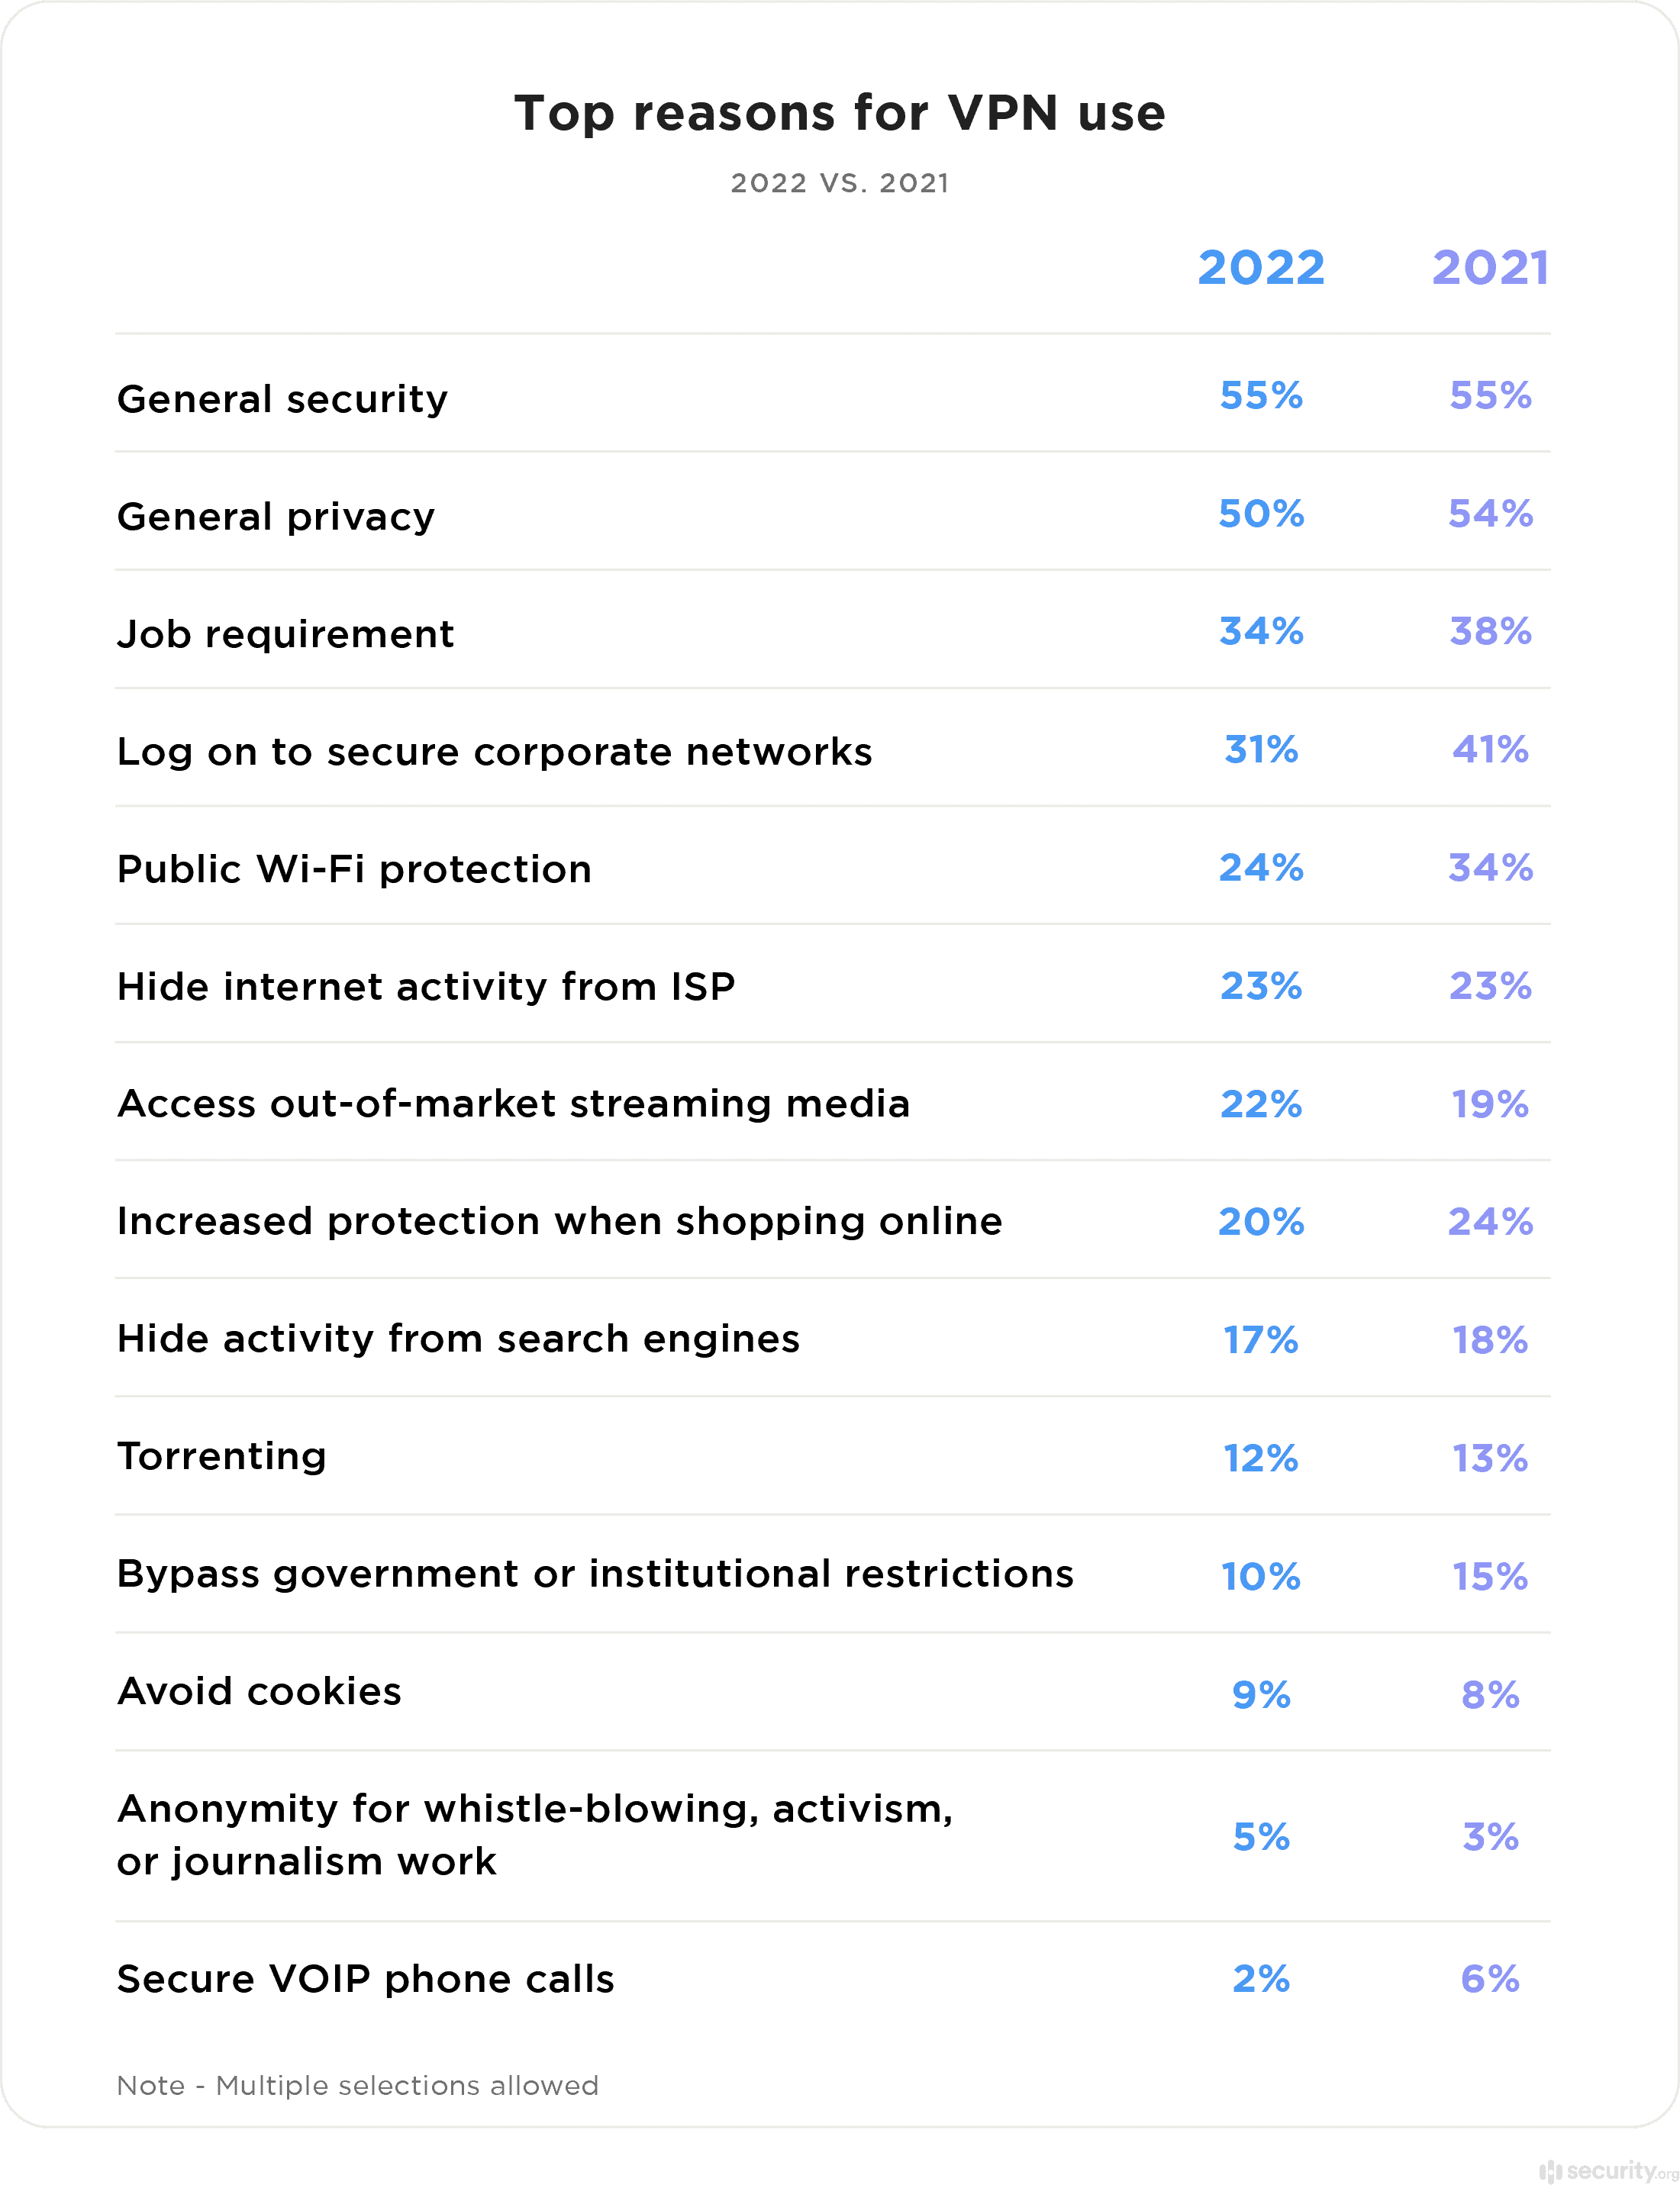 Top Reasons For VPN Use